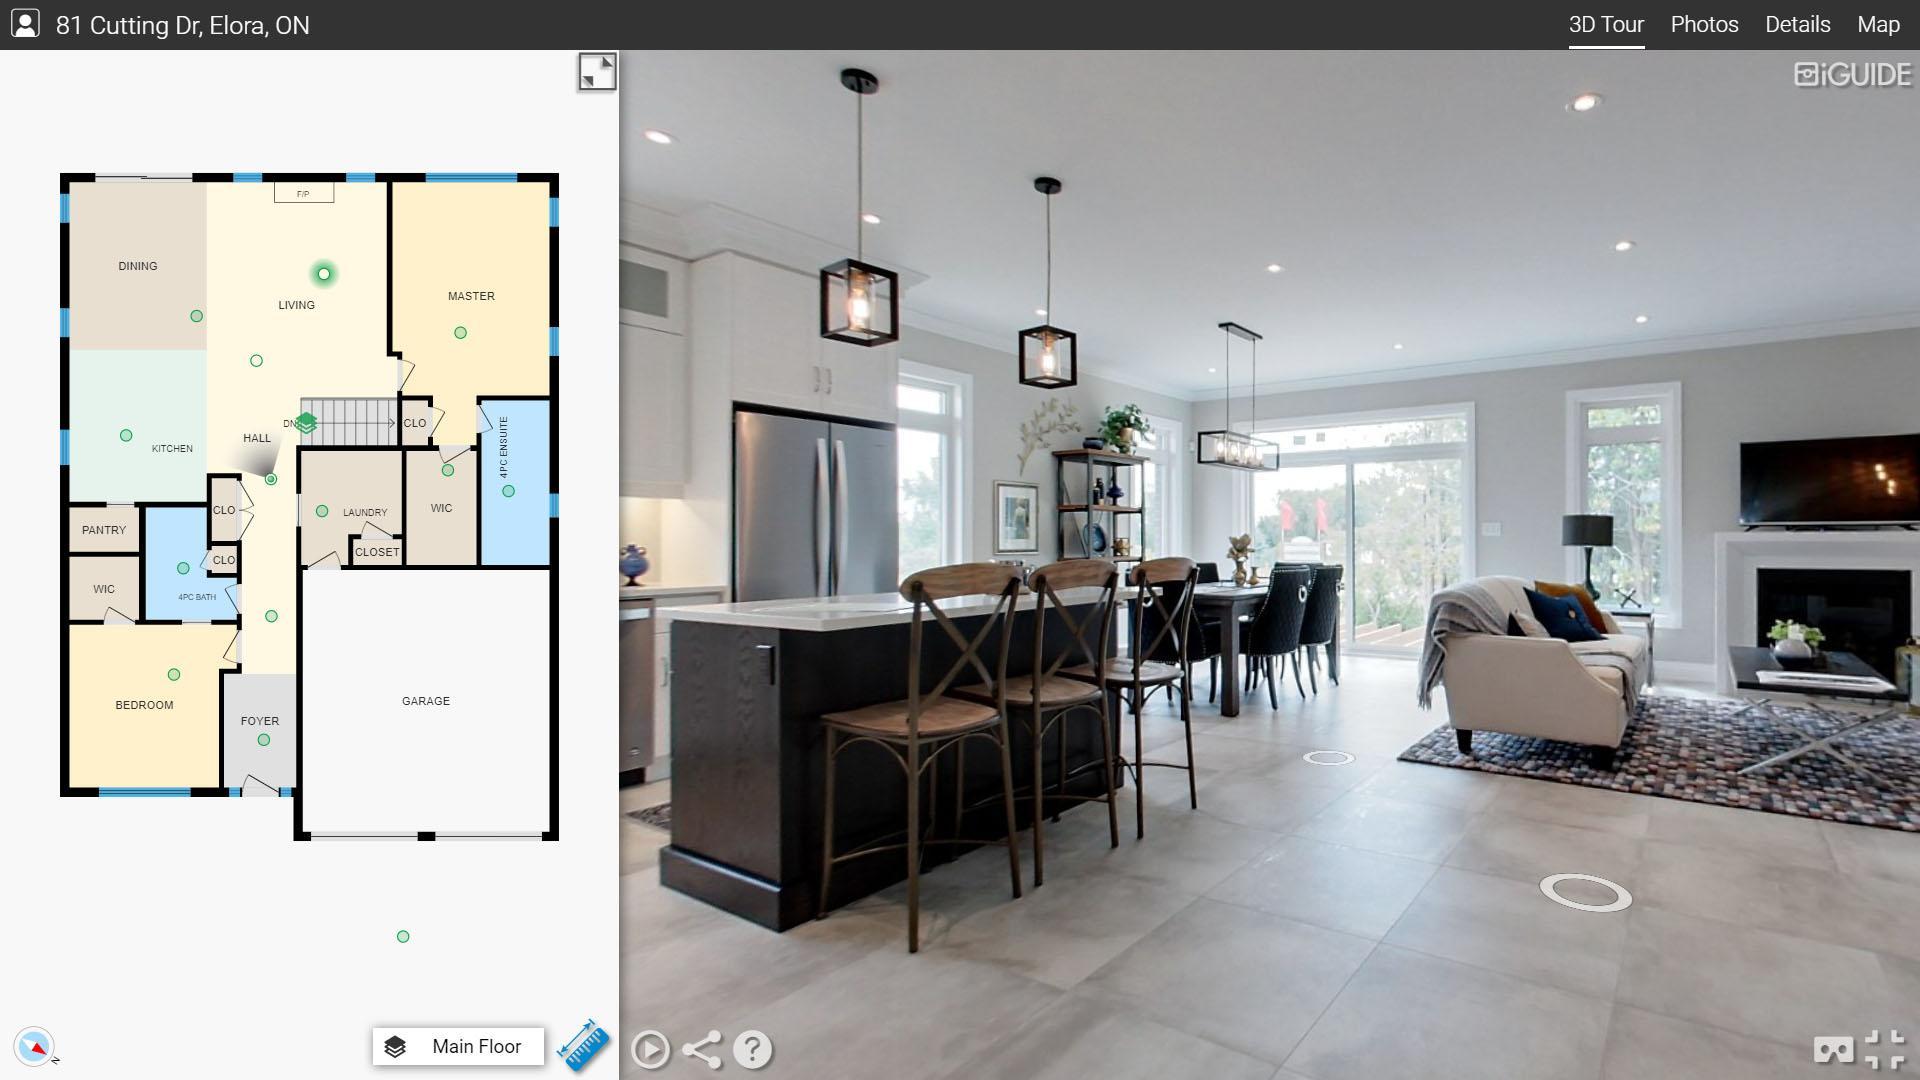 iguide 3d tour for real estate